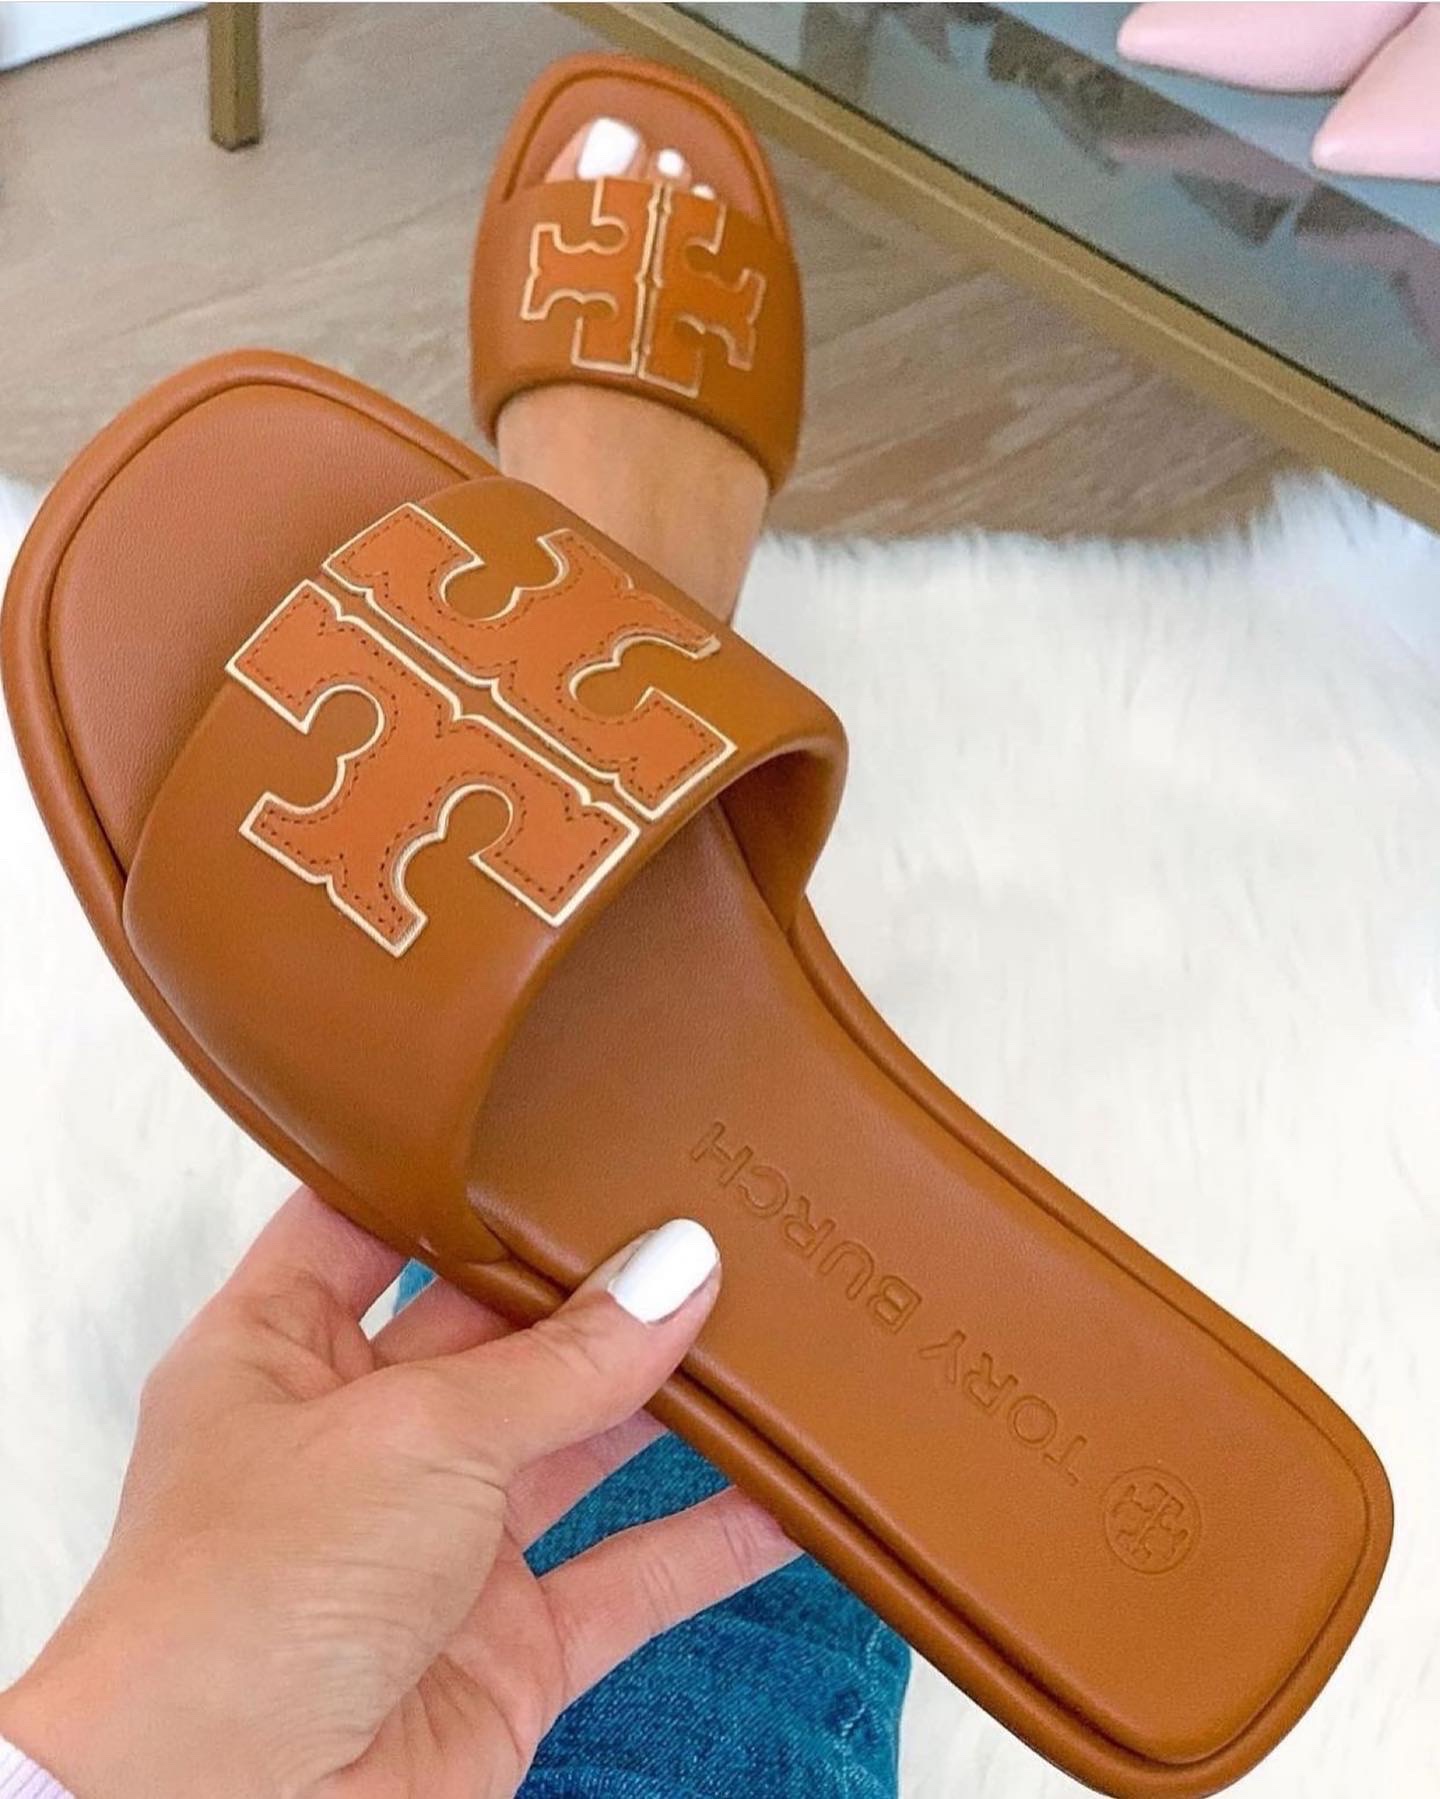 Tory Burch Private Sale: Unbelievably Good Deals on Sandals, Bags, More –  SheKnows